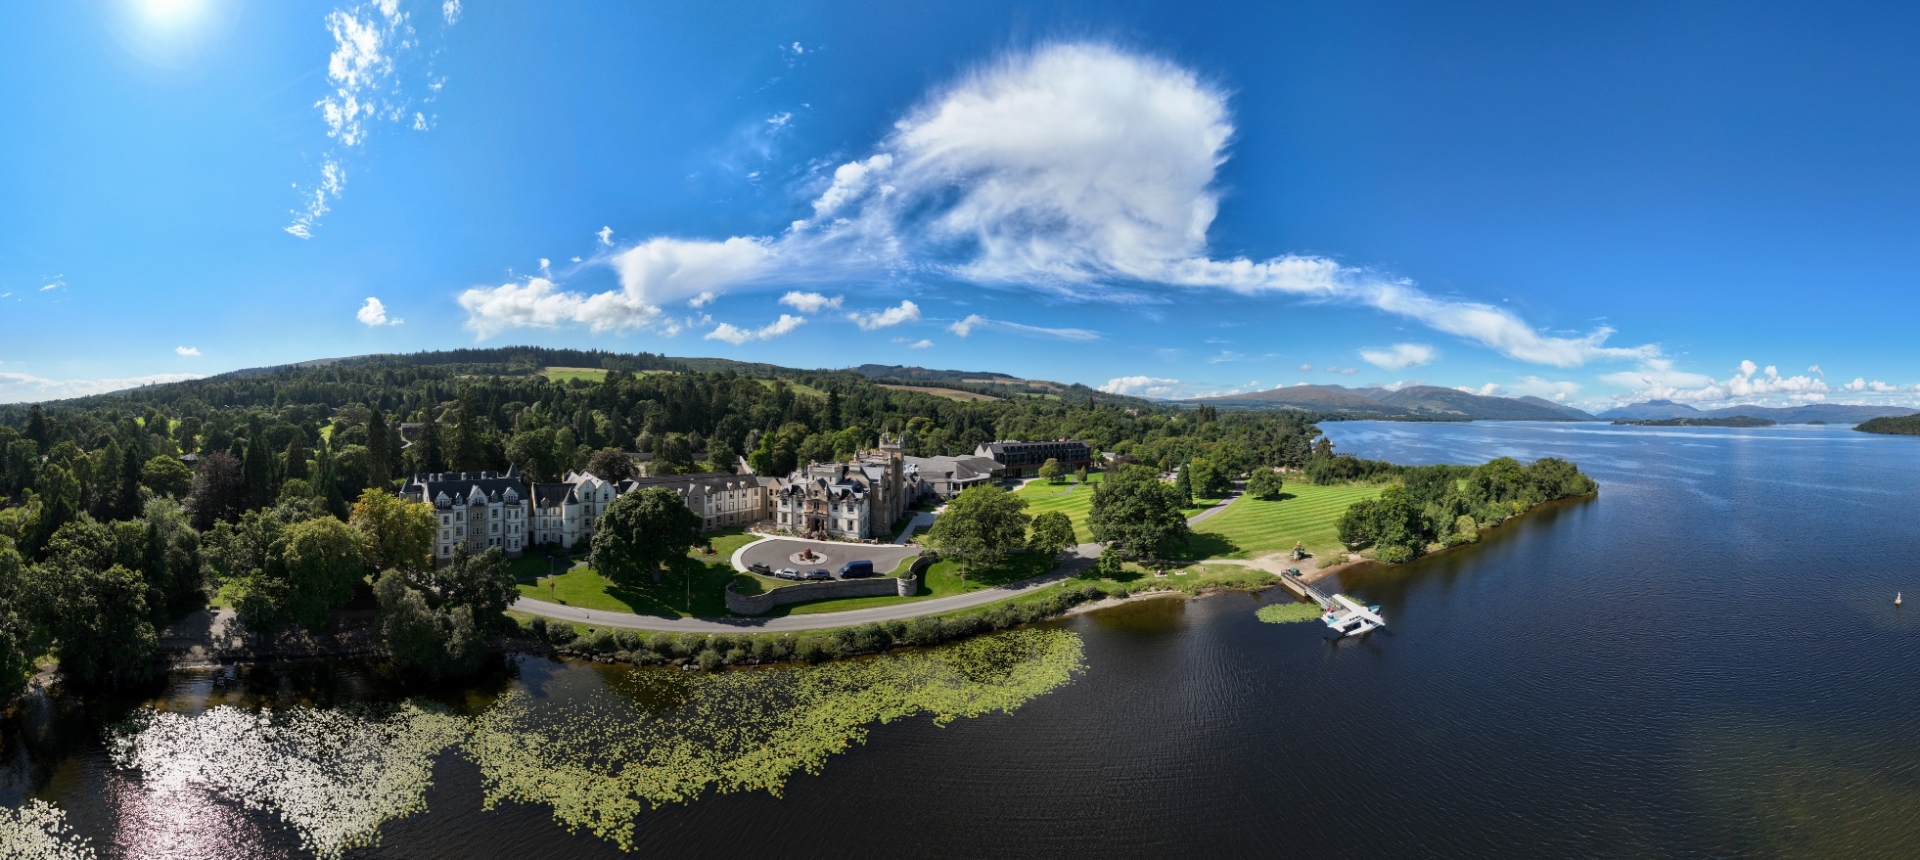 Aerial view of cameron house showing the beautiful green hotel grounds and the blue waters of Loch Lomond